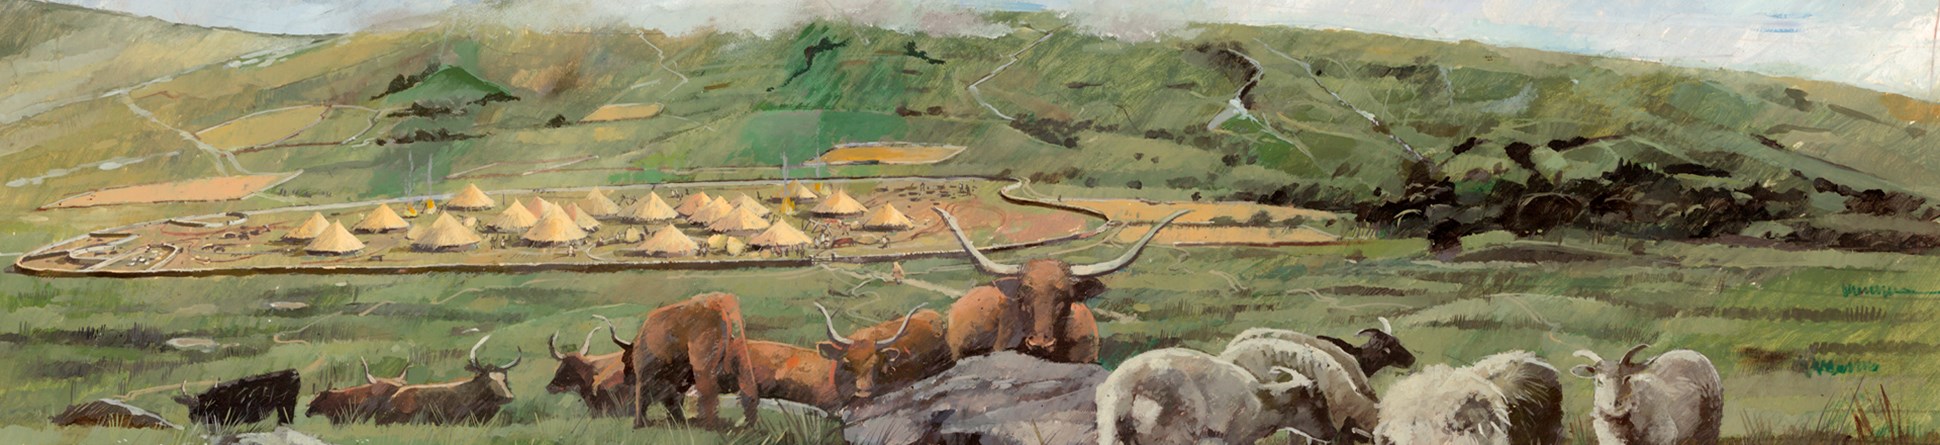 Painted reconstruction of the prehistoric settlement at Grimspound, Dartmoor.